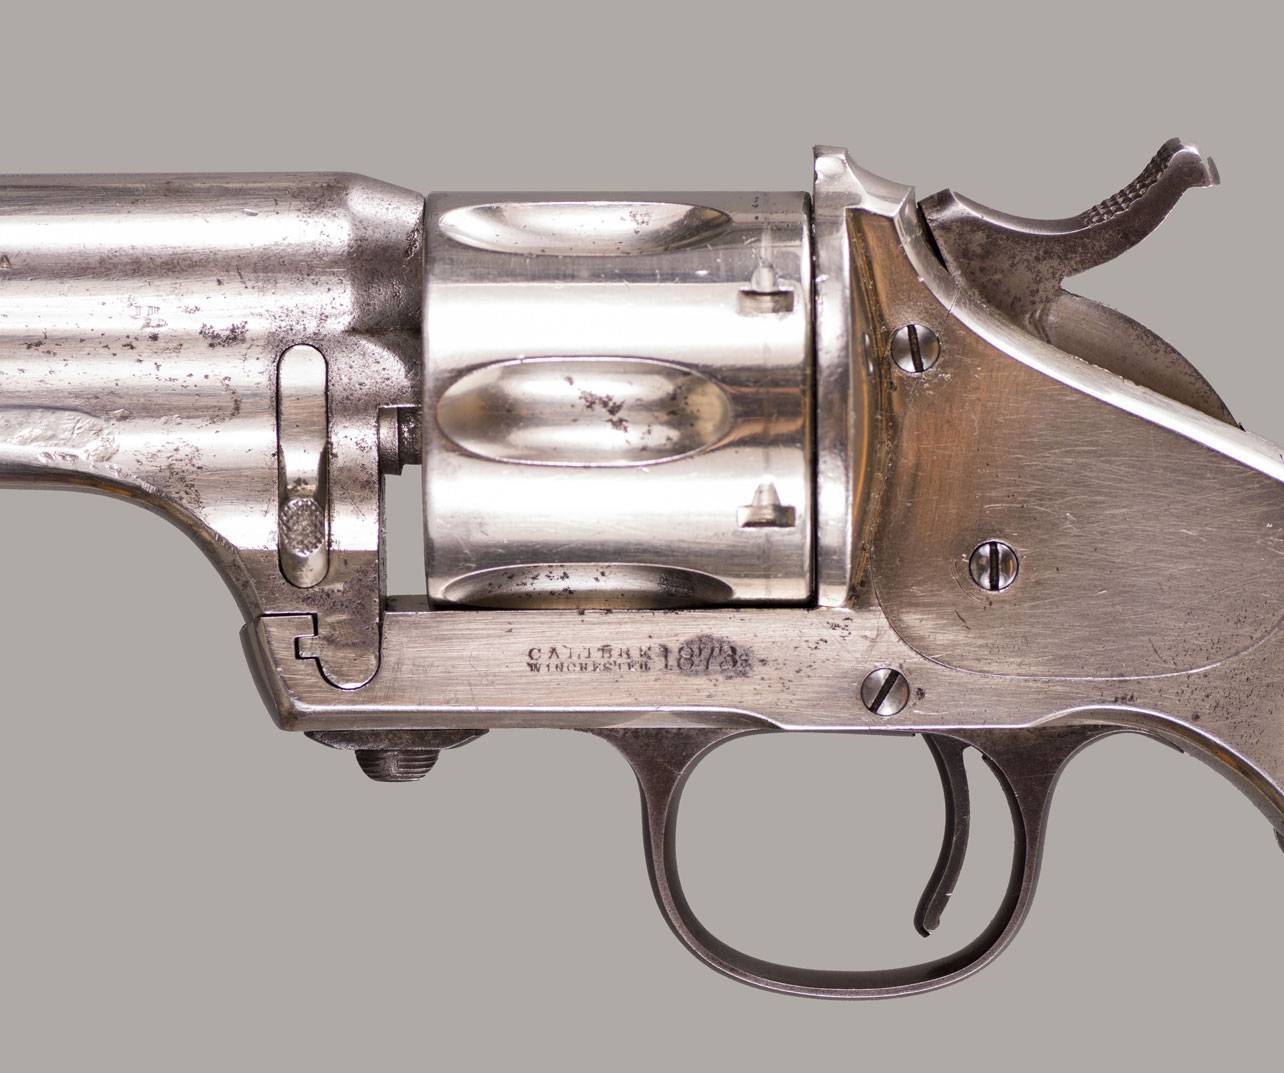 Ugly ducklings, no more merwin, hulbert & co. revolvers finally get respect as sought-after examples of old west hardware.